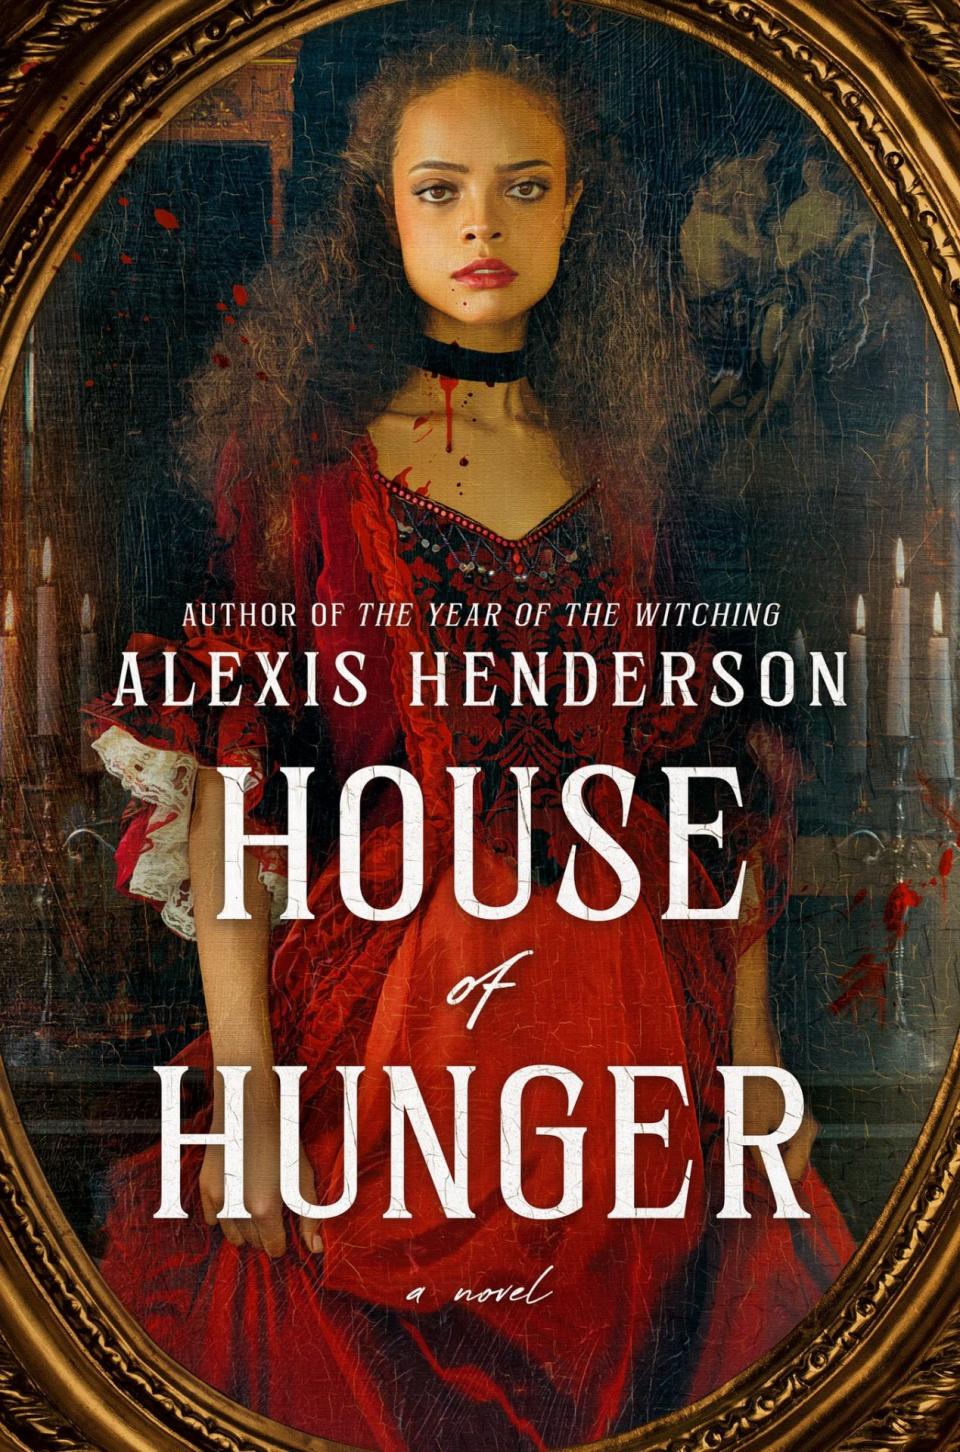 The cover for House of Hunger shows a young Black woman with a ribbon around her neck in period dress with blood leaking from her throat